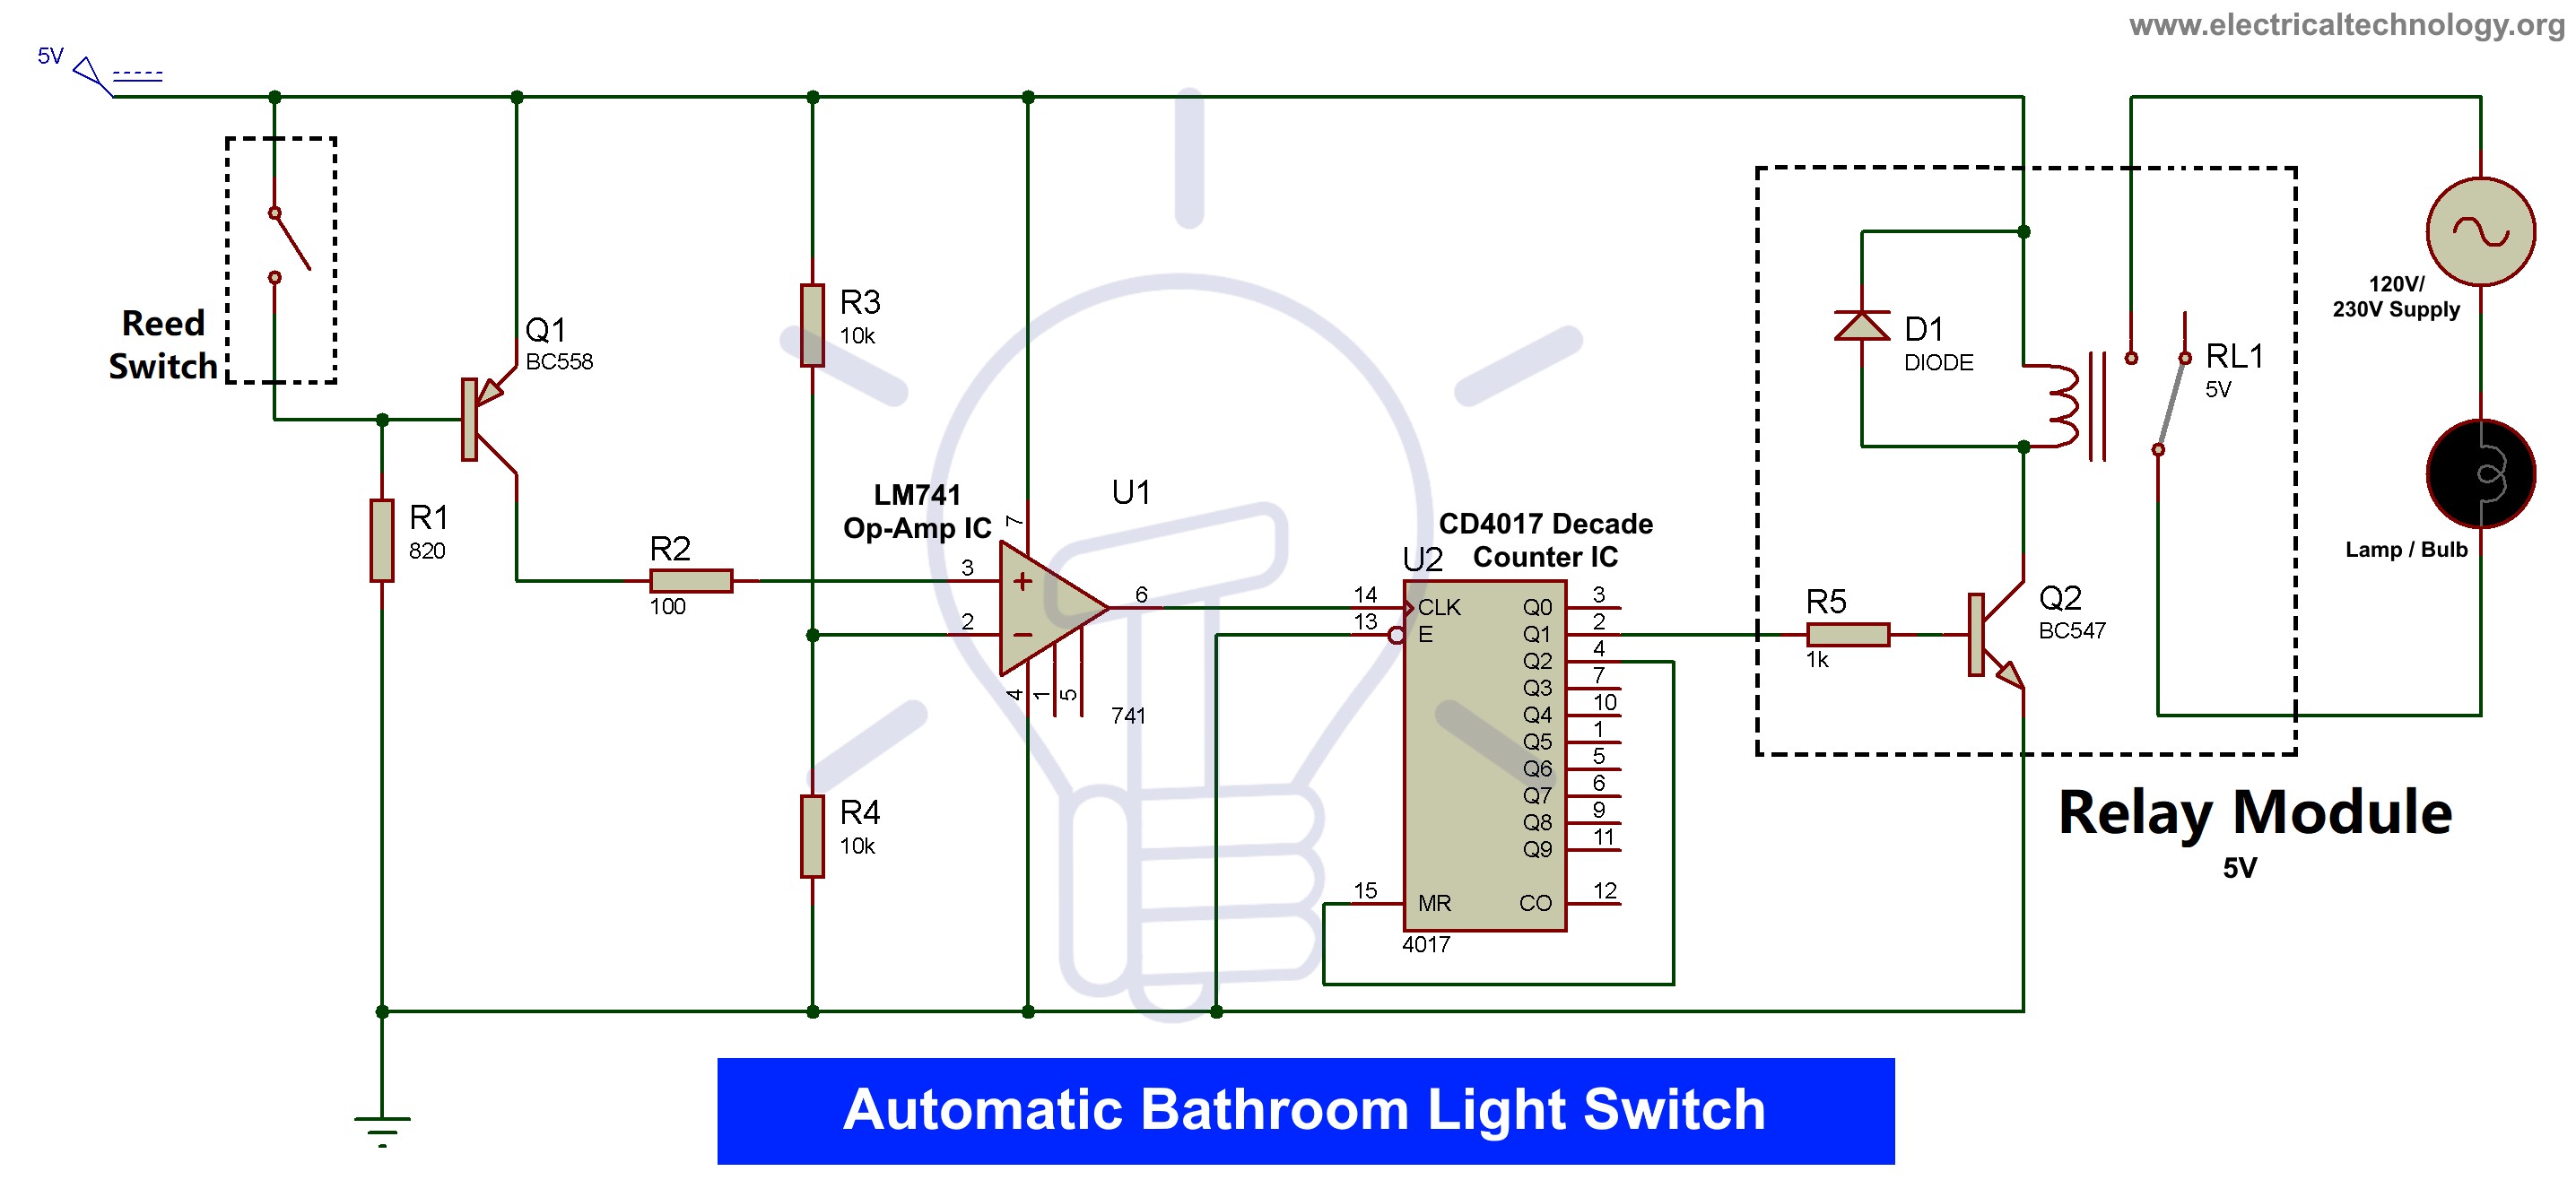 Emergency Light Wiring Diagram Automatic Bathroom Light Switch Circuit Diagram and Operation Of Emergency Light Wiring Diagram